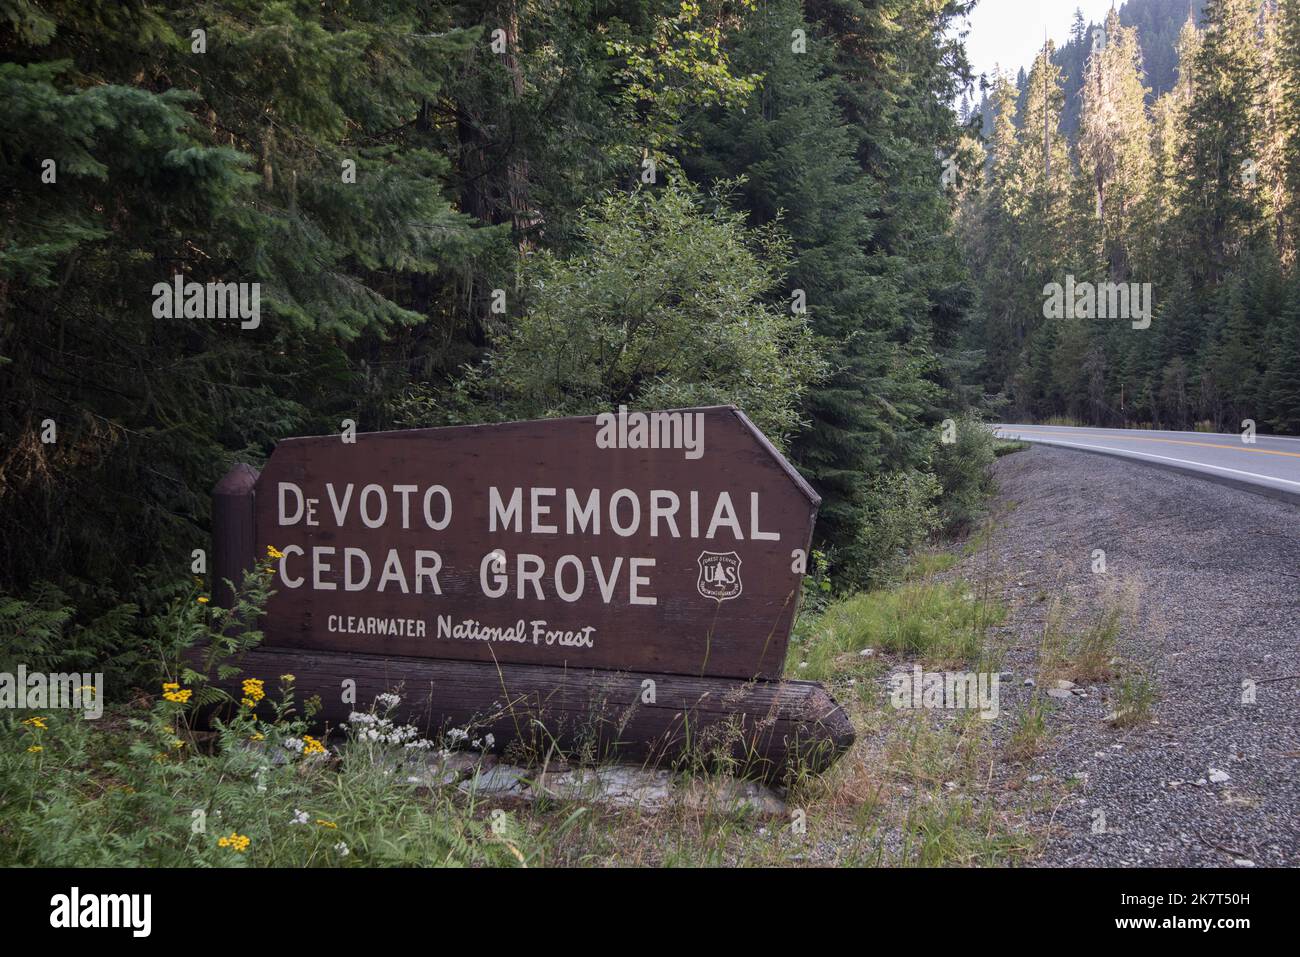 Sign Marking the Entrance to the DeVoto Memorial Cedar Grove, on Highway 12, Clearwater National Forest, Powell, Idaho County, Idaho, USA Stock Photo